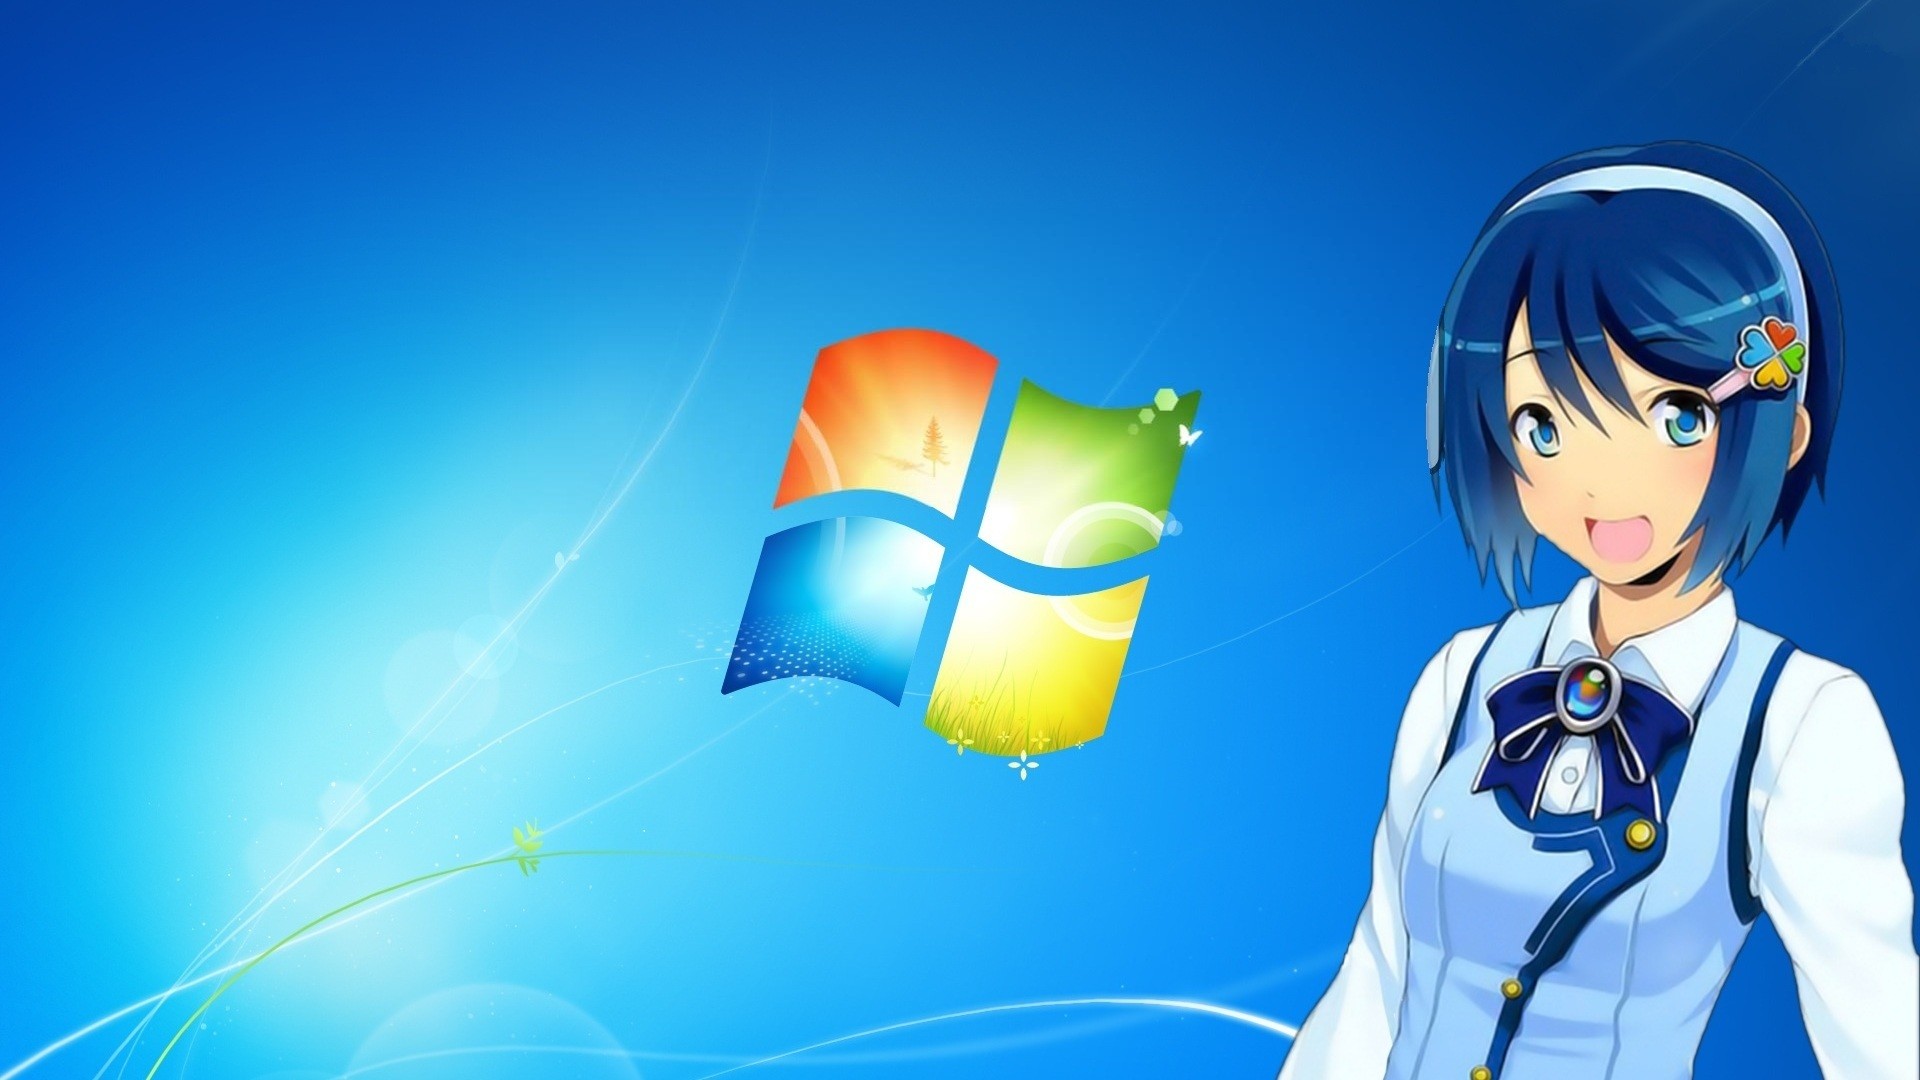 Anime Wallpaper 1920x1080 (73+ images)